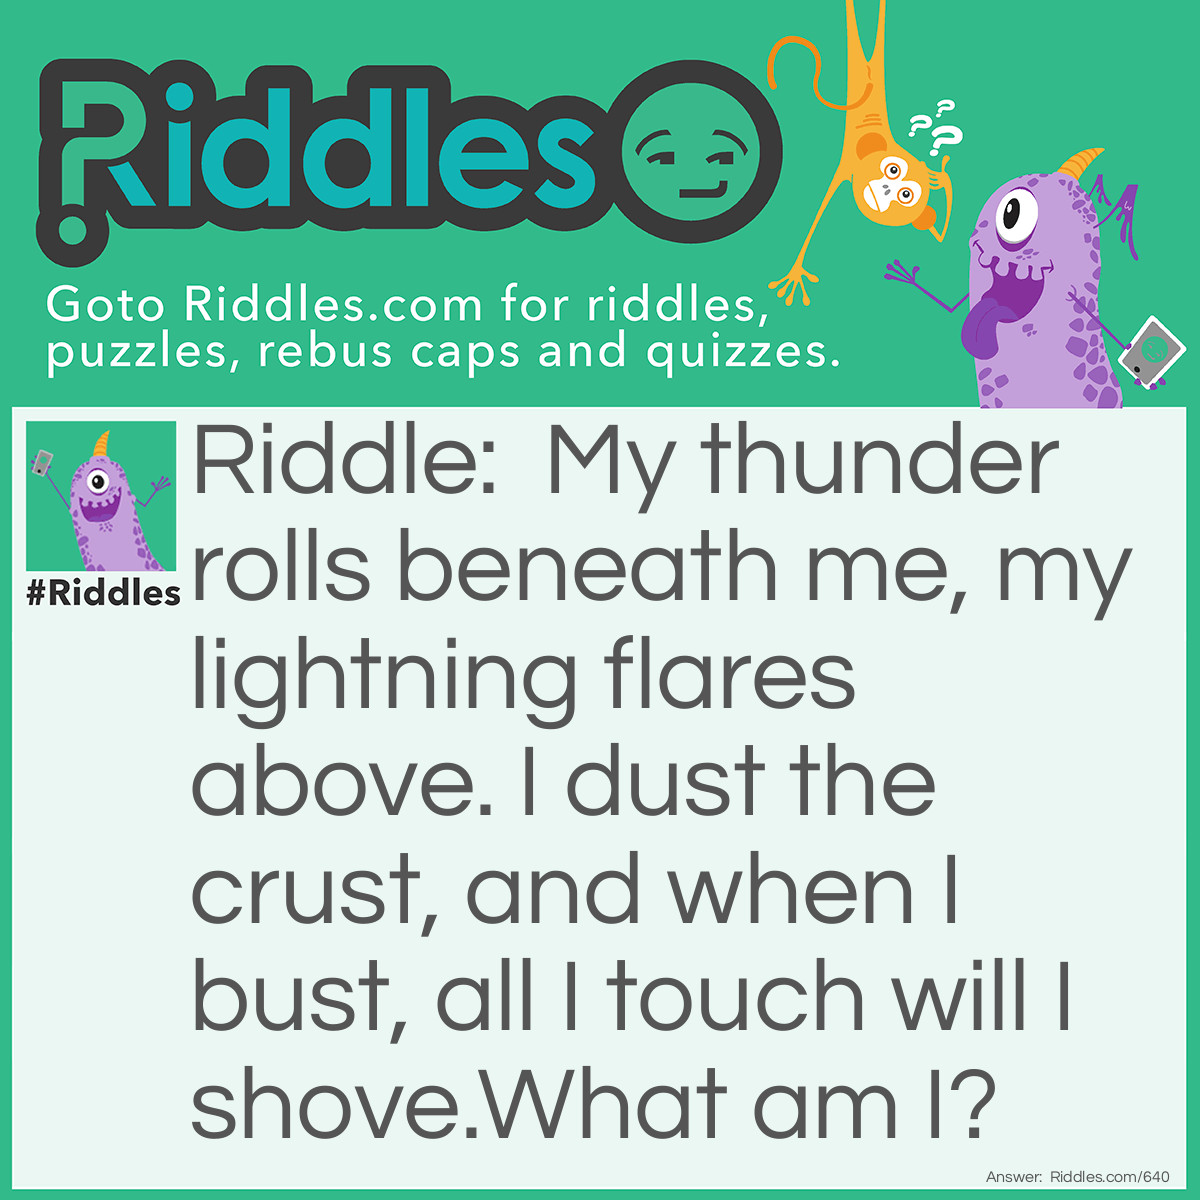 Riddle: My thunder rolls beneath me, my lightning flares above. I dust the crust, and when I bust, all I touch will I shove.
What am I? Answer: I am a volcano.